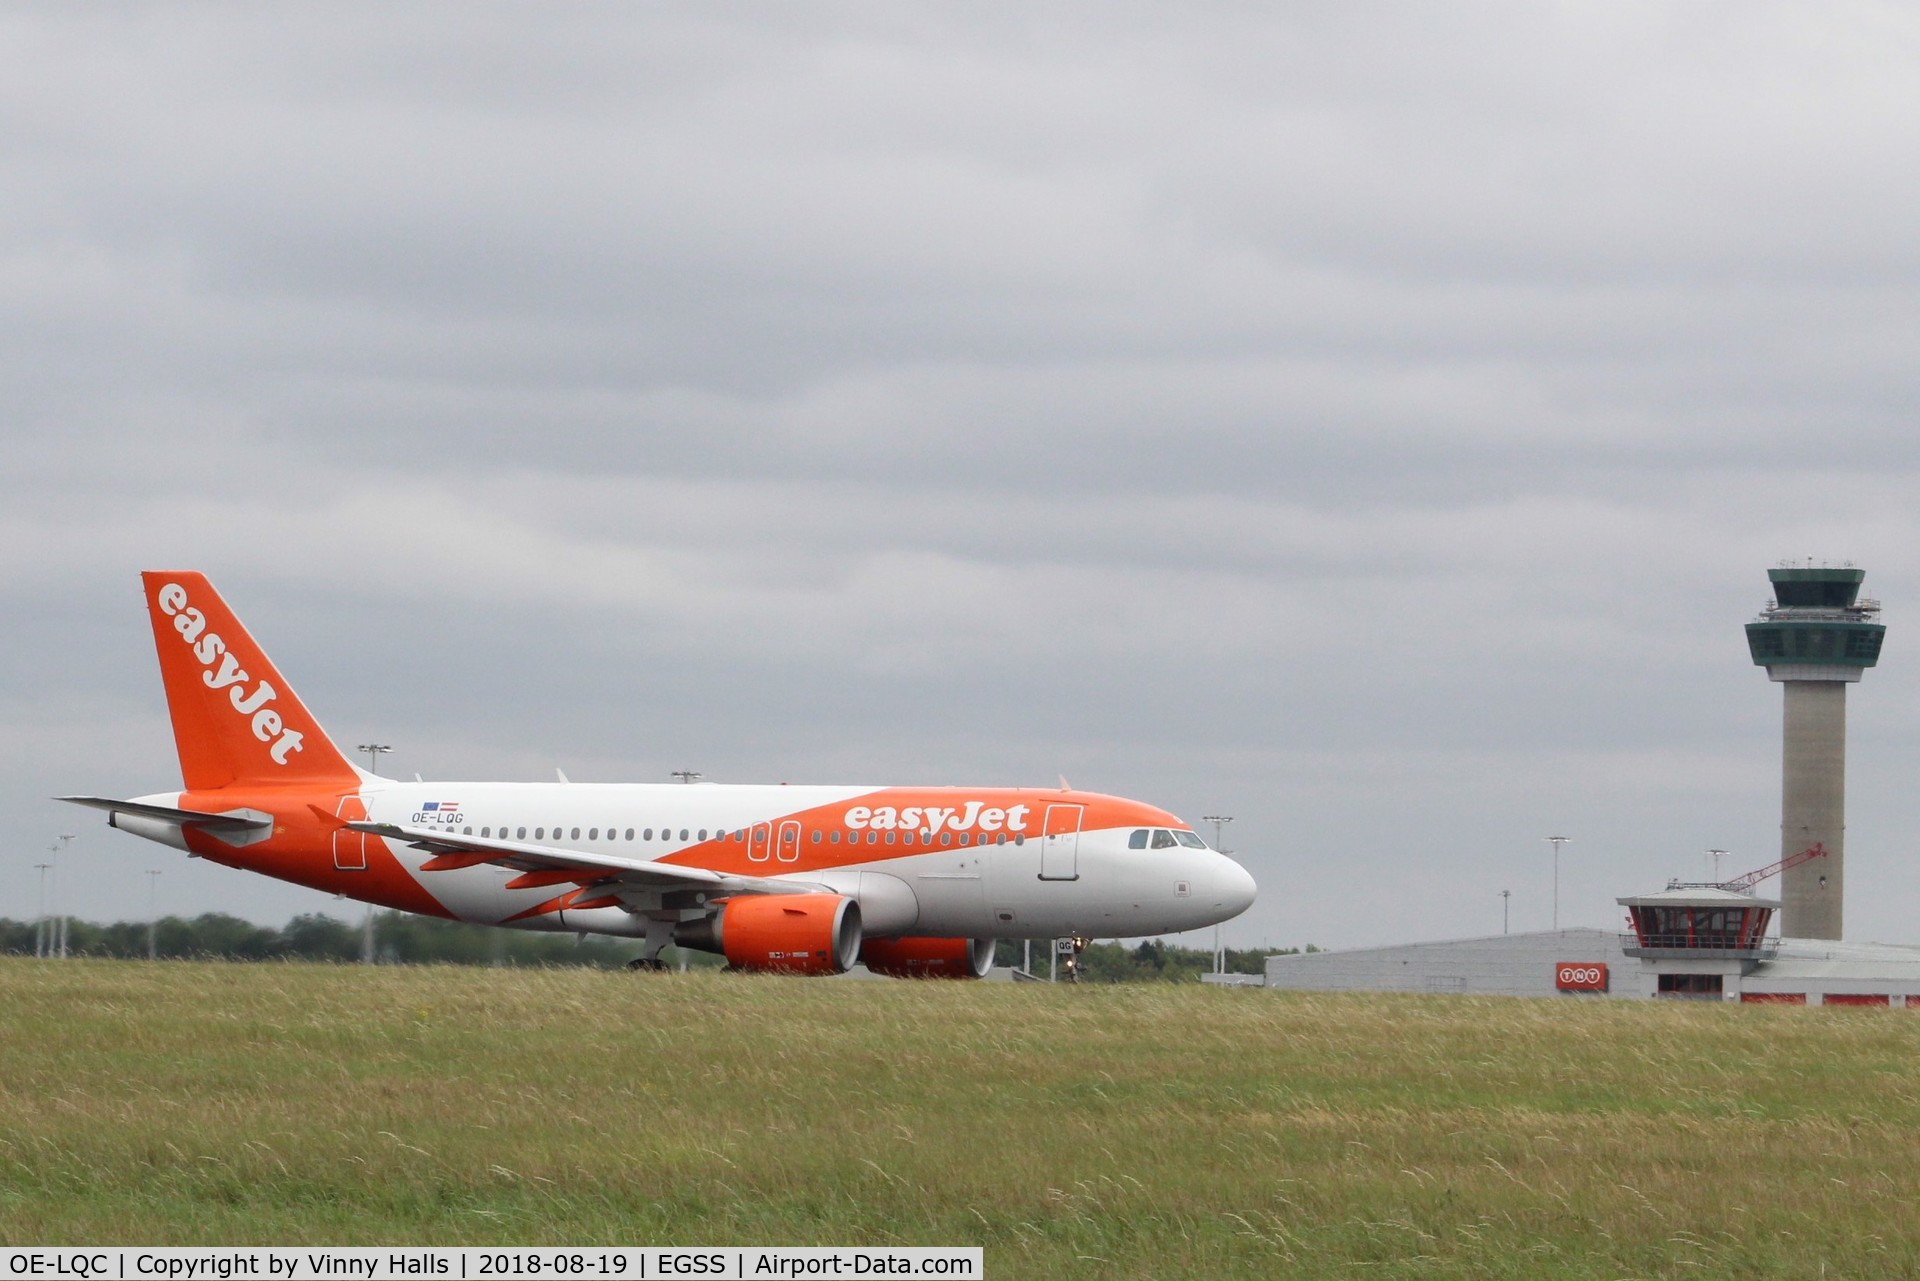 OE-LQC, 2009 Airbus A319-111 C/N 3788, Departs Stansted